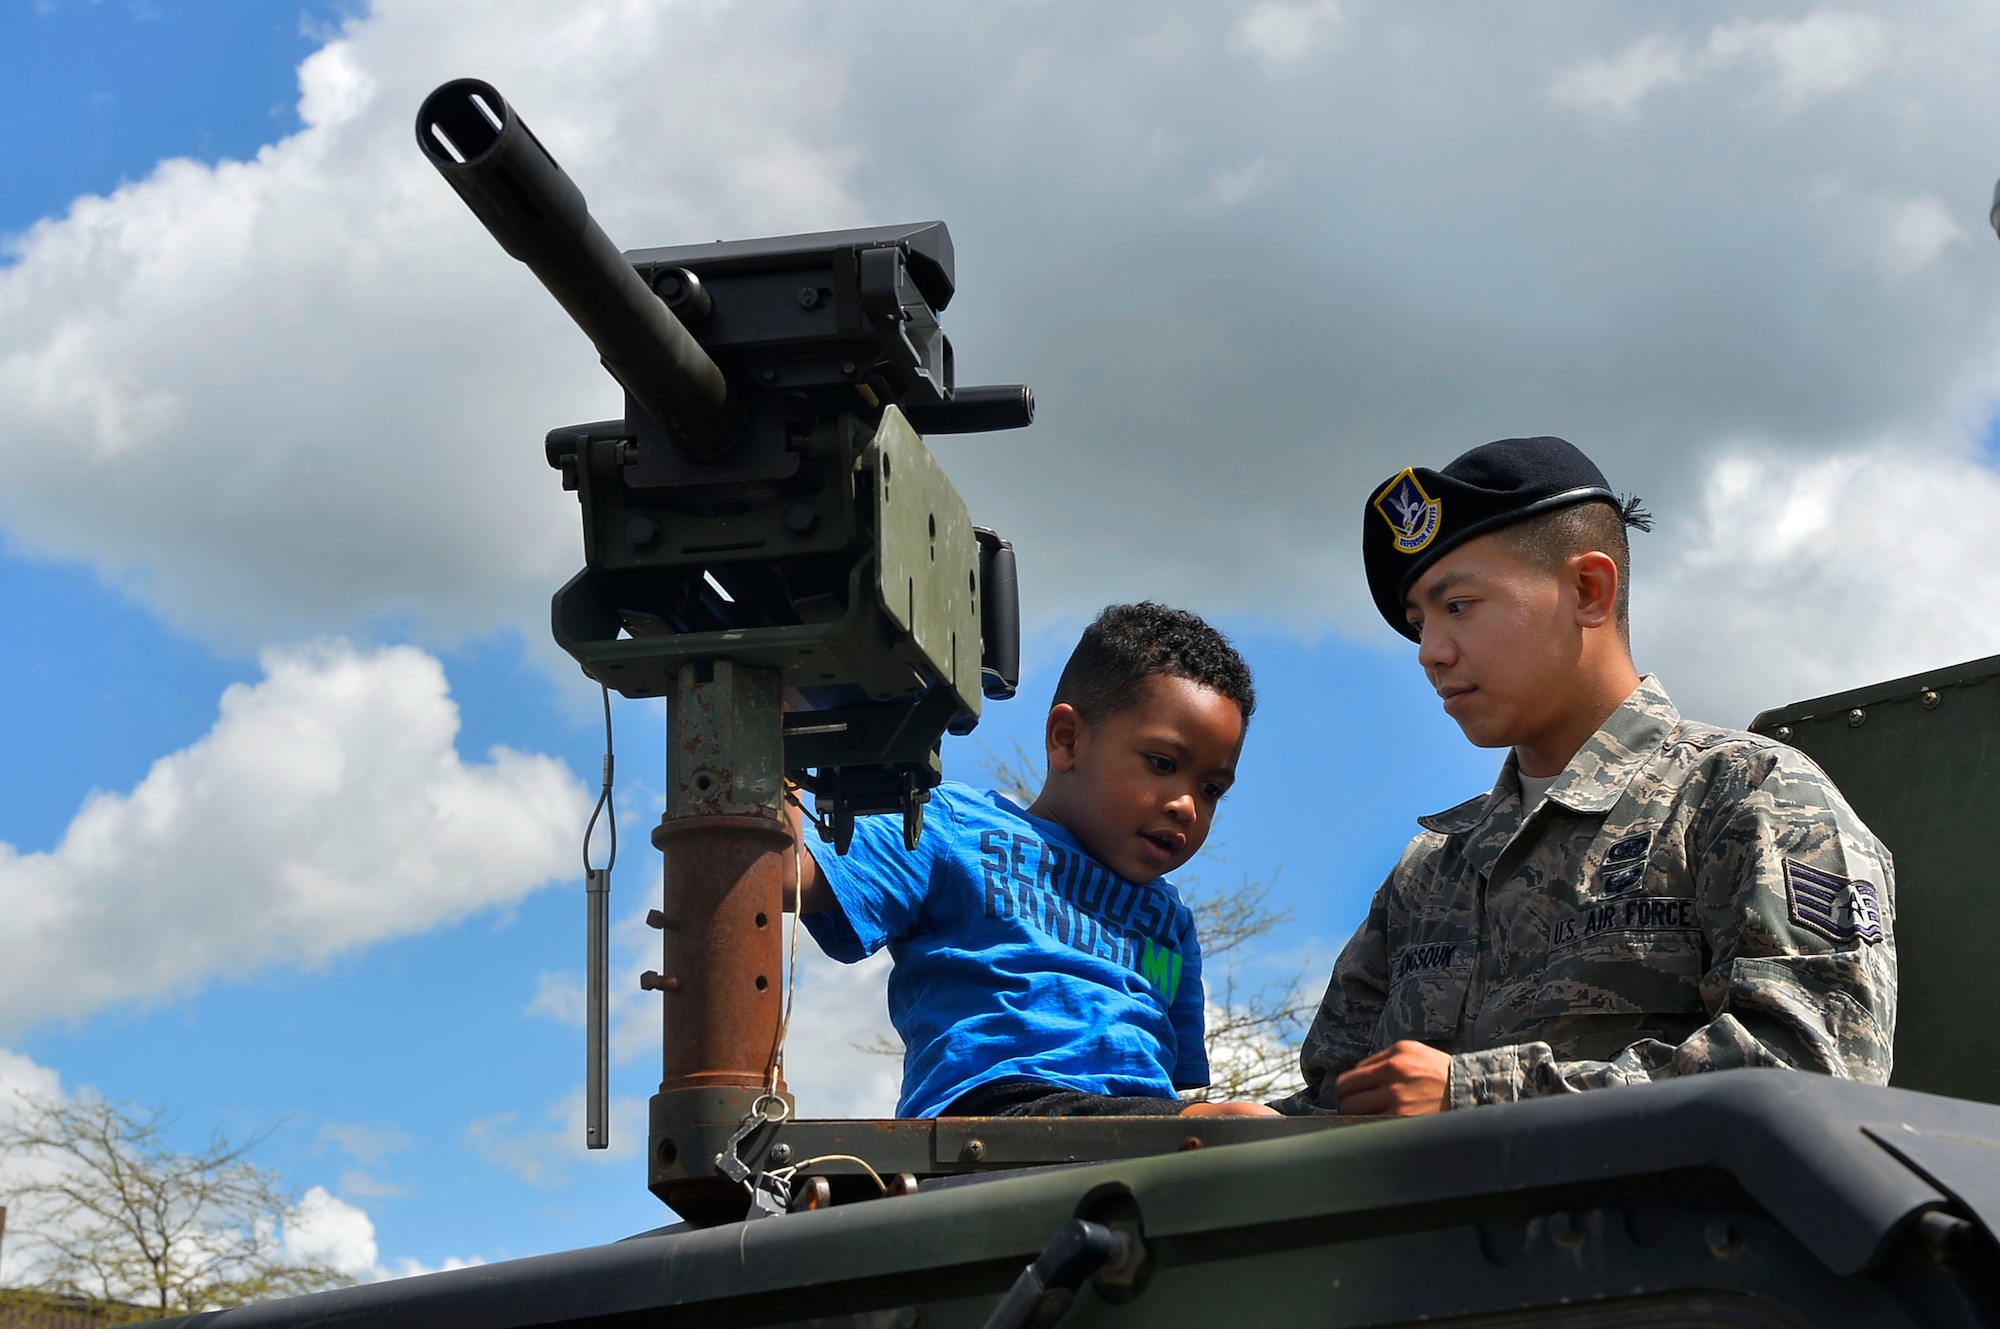 Staff Sgt. Jesse Sengsouk, 435th Security Forces Squadron training instructor, shows a child the functions of a gun on a Humvee during a police display on Ramstein Air Base, Germany, May 13, 2017. The family event exhibited a variety of vehicles, weapons, information booths, and demonstrations. (U.S. Air Force photo by Airman 1st Class Joshua Magbanua) 